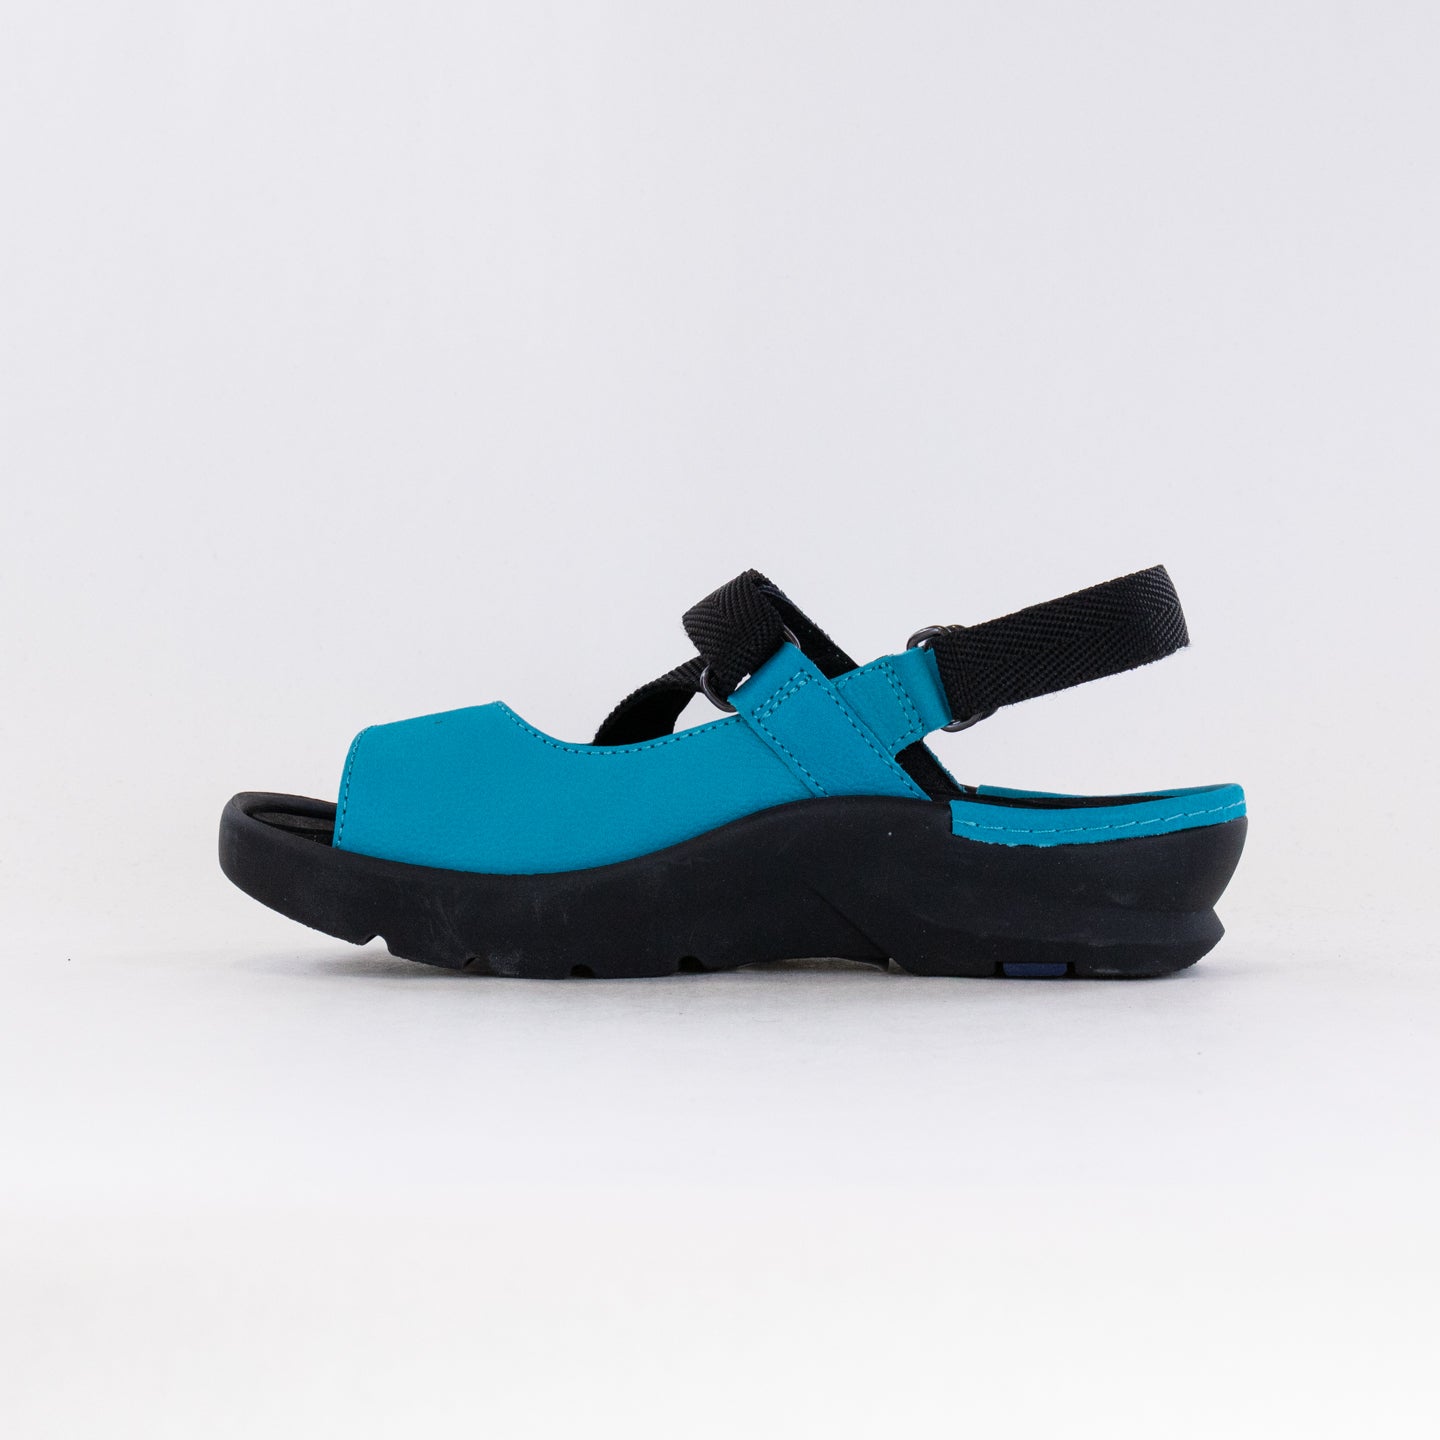 Wolky Lisse (Women's) - Turquoise